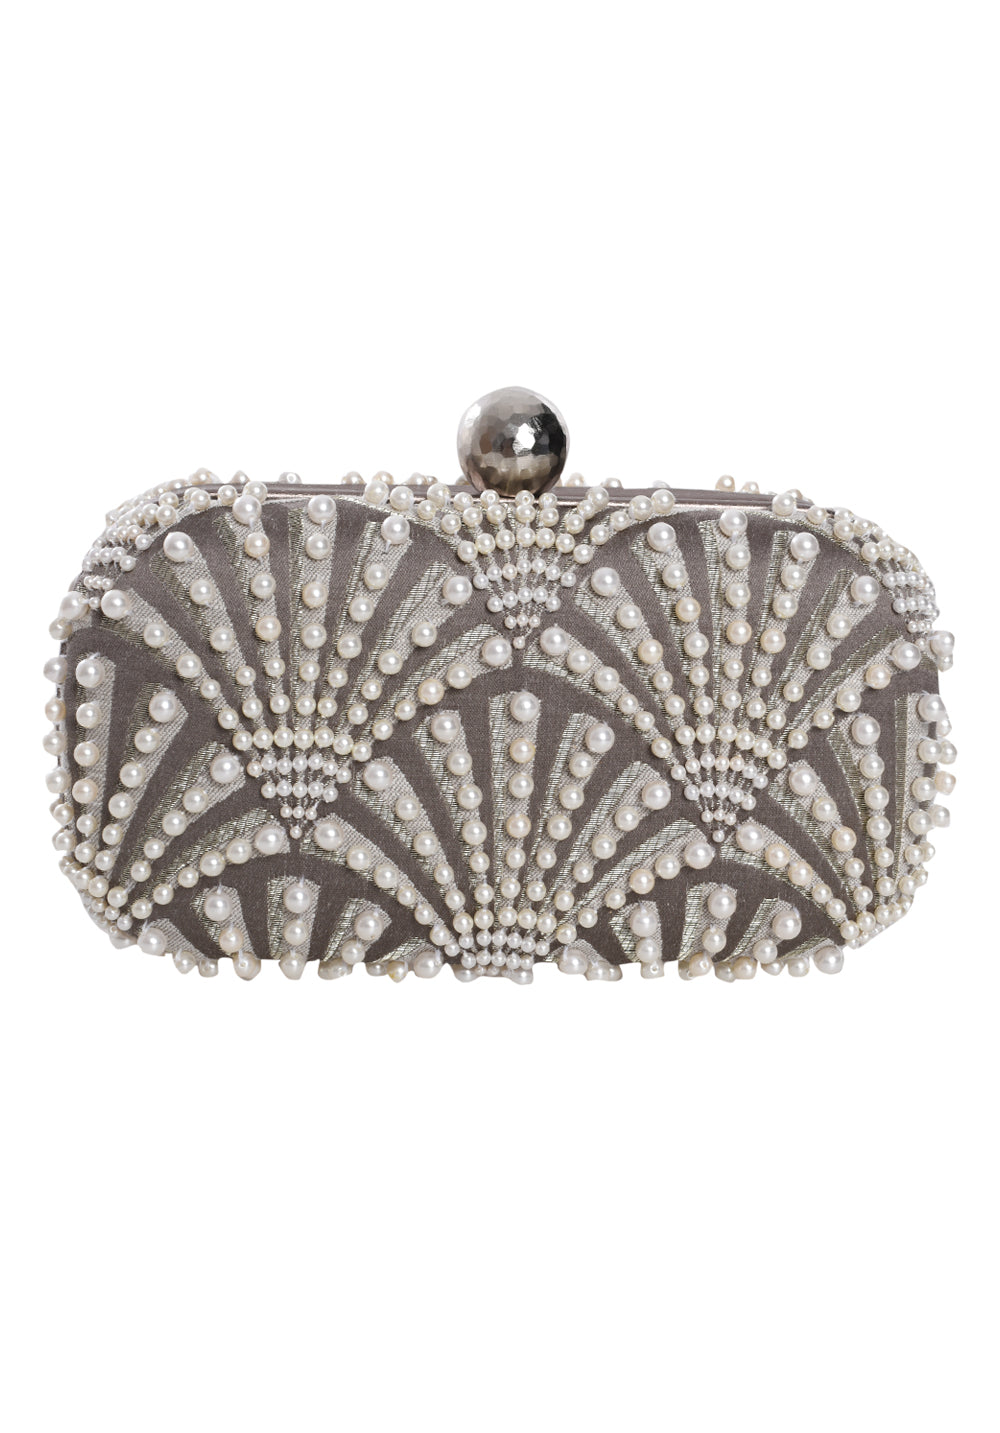 SCALLOPS SILVER EMBELLISHED PEARL BOX